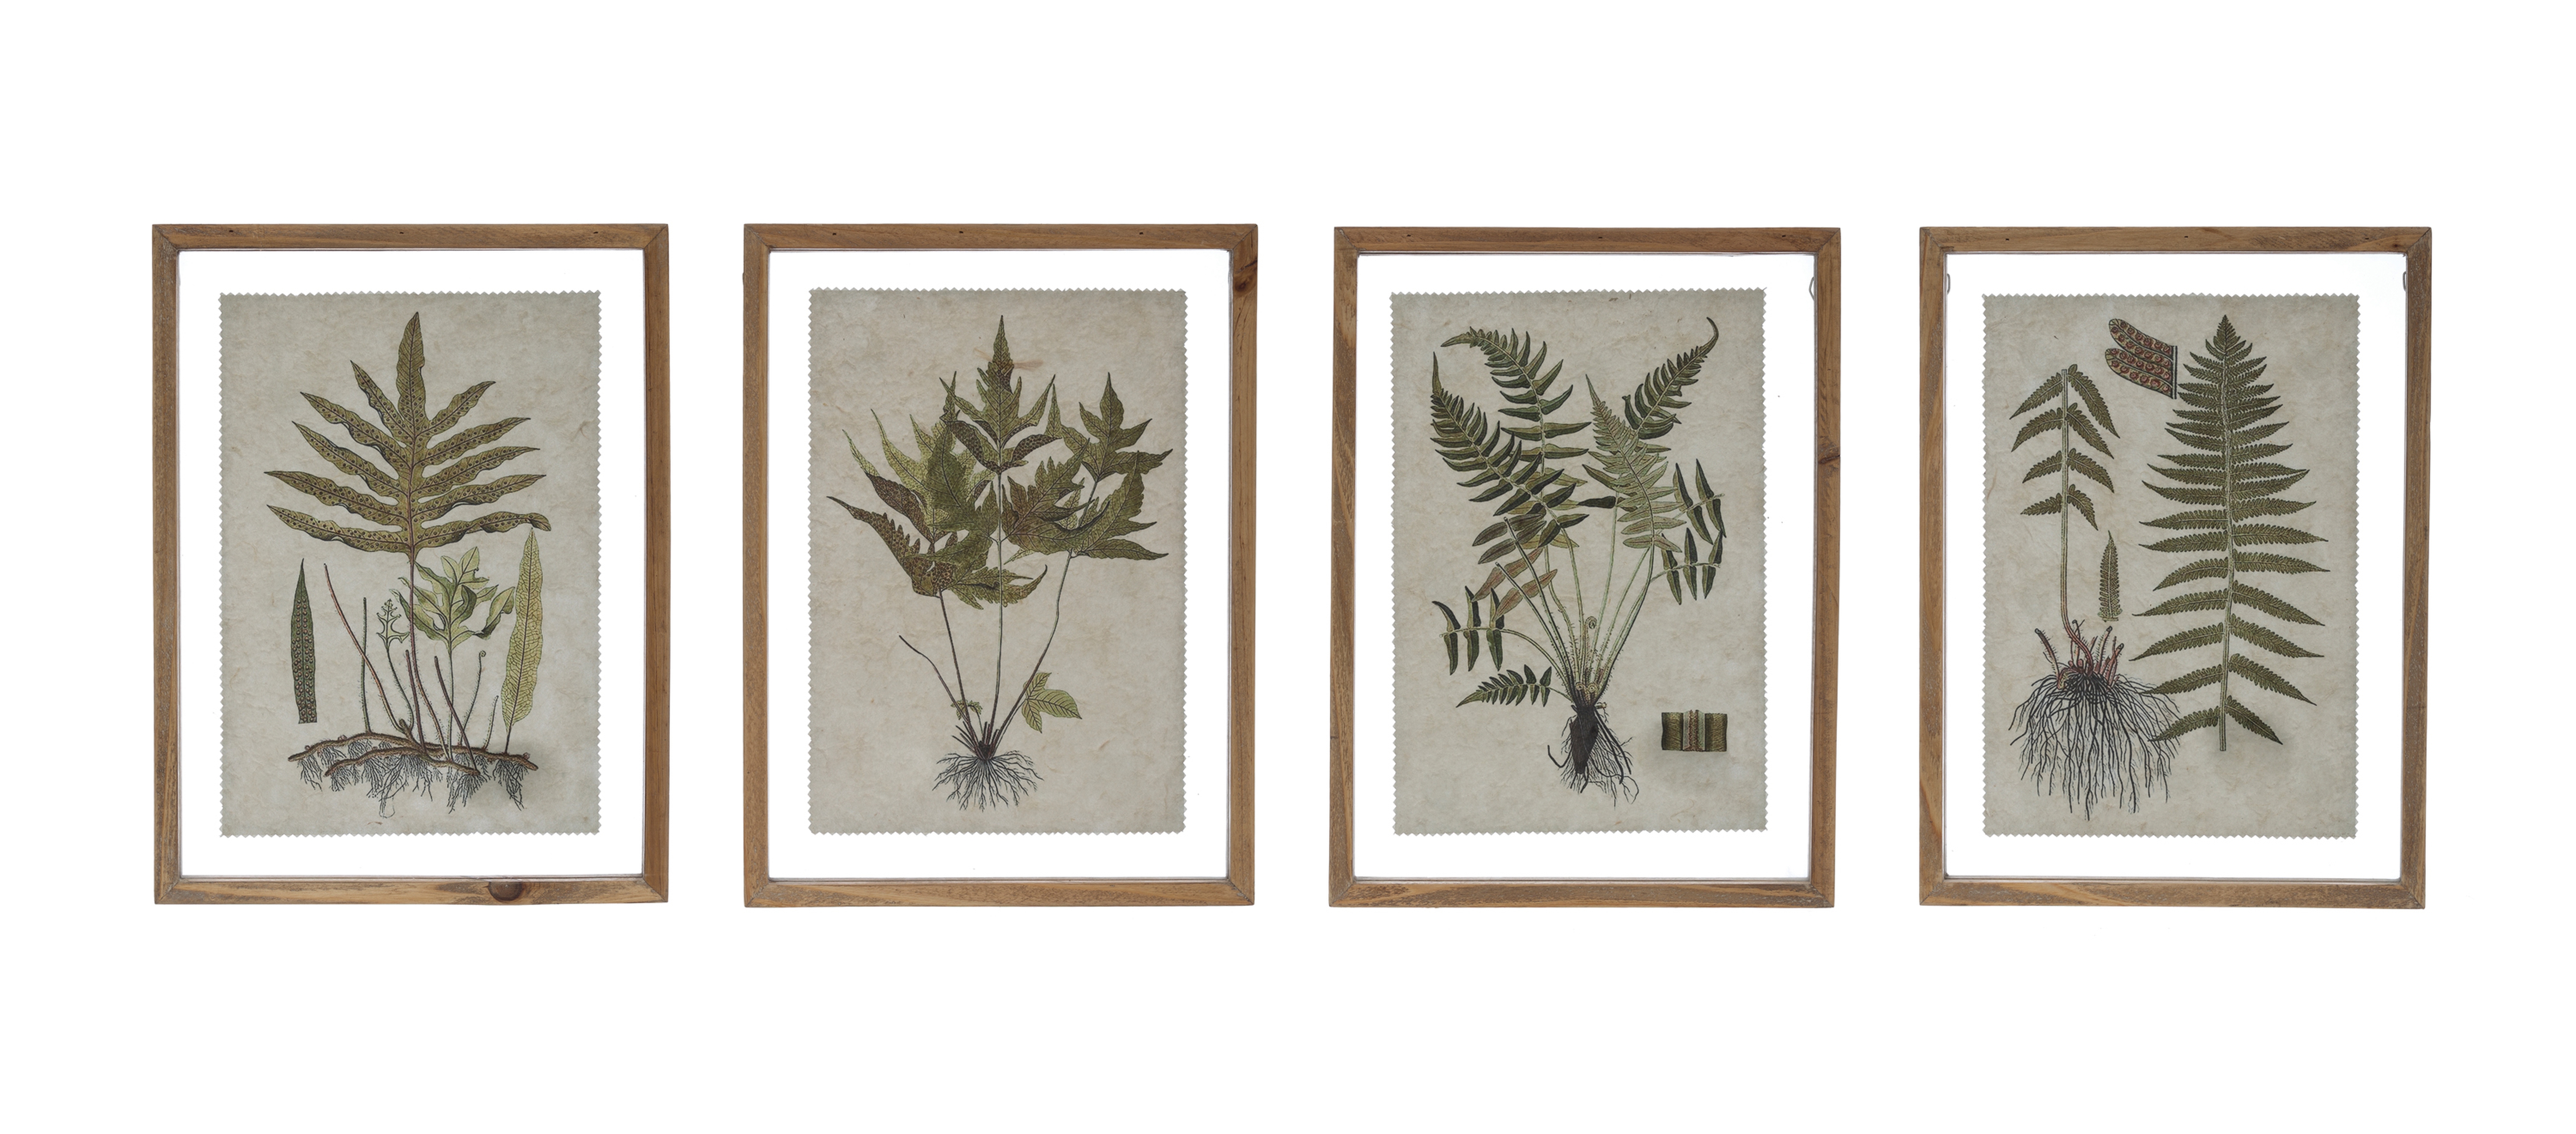 Botanical Print on Textured Material Wall Décor with Wood Frame (Set of 4 Styles) - Nomad Home